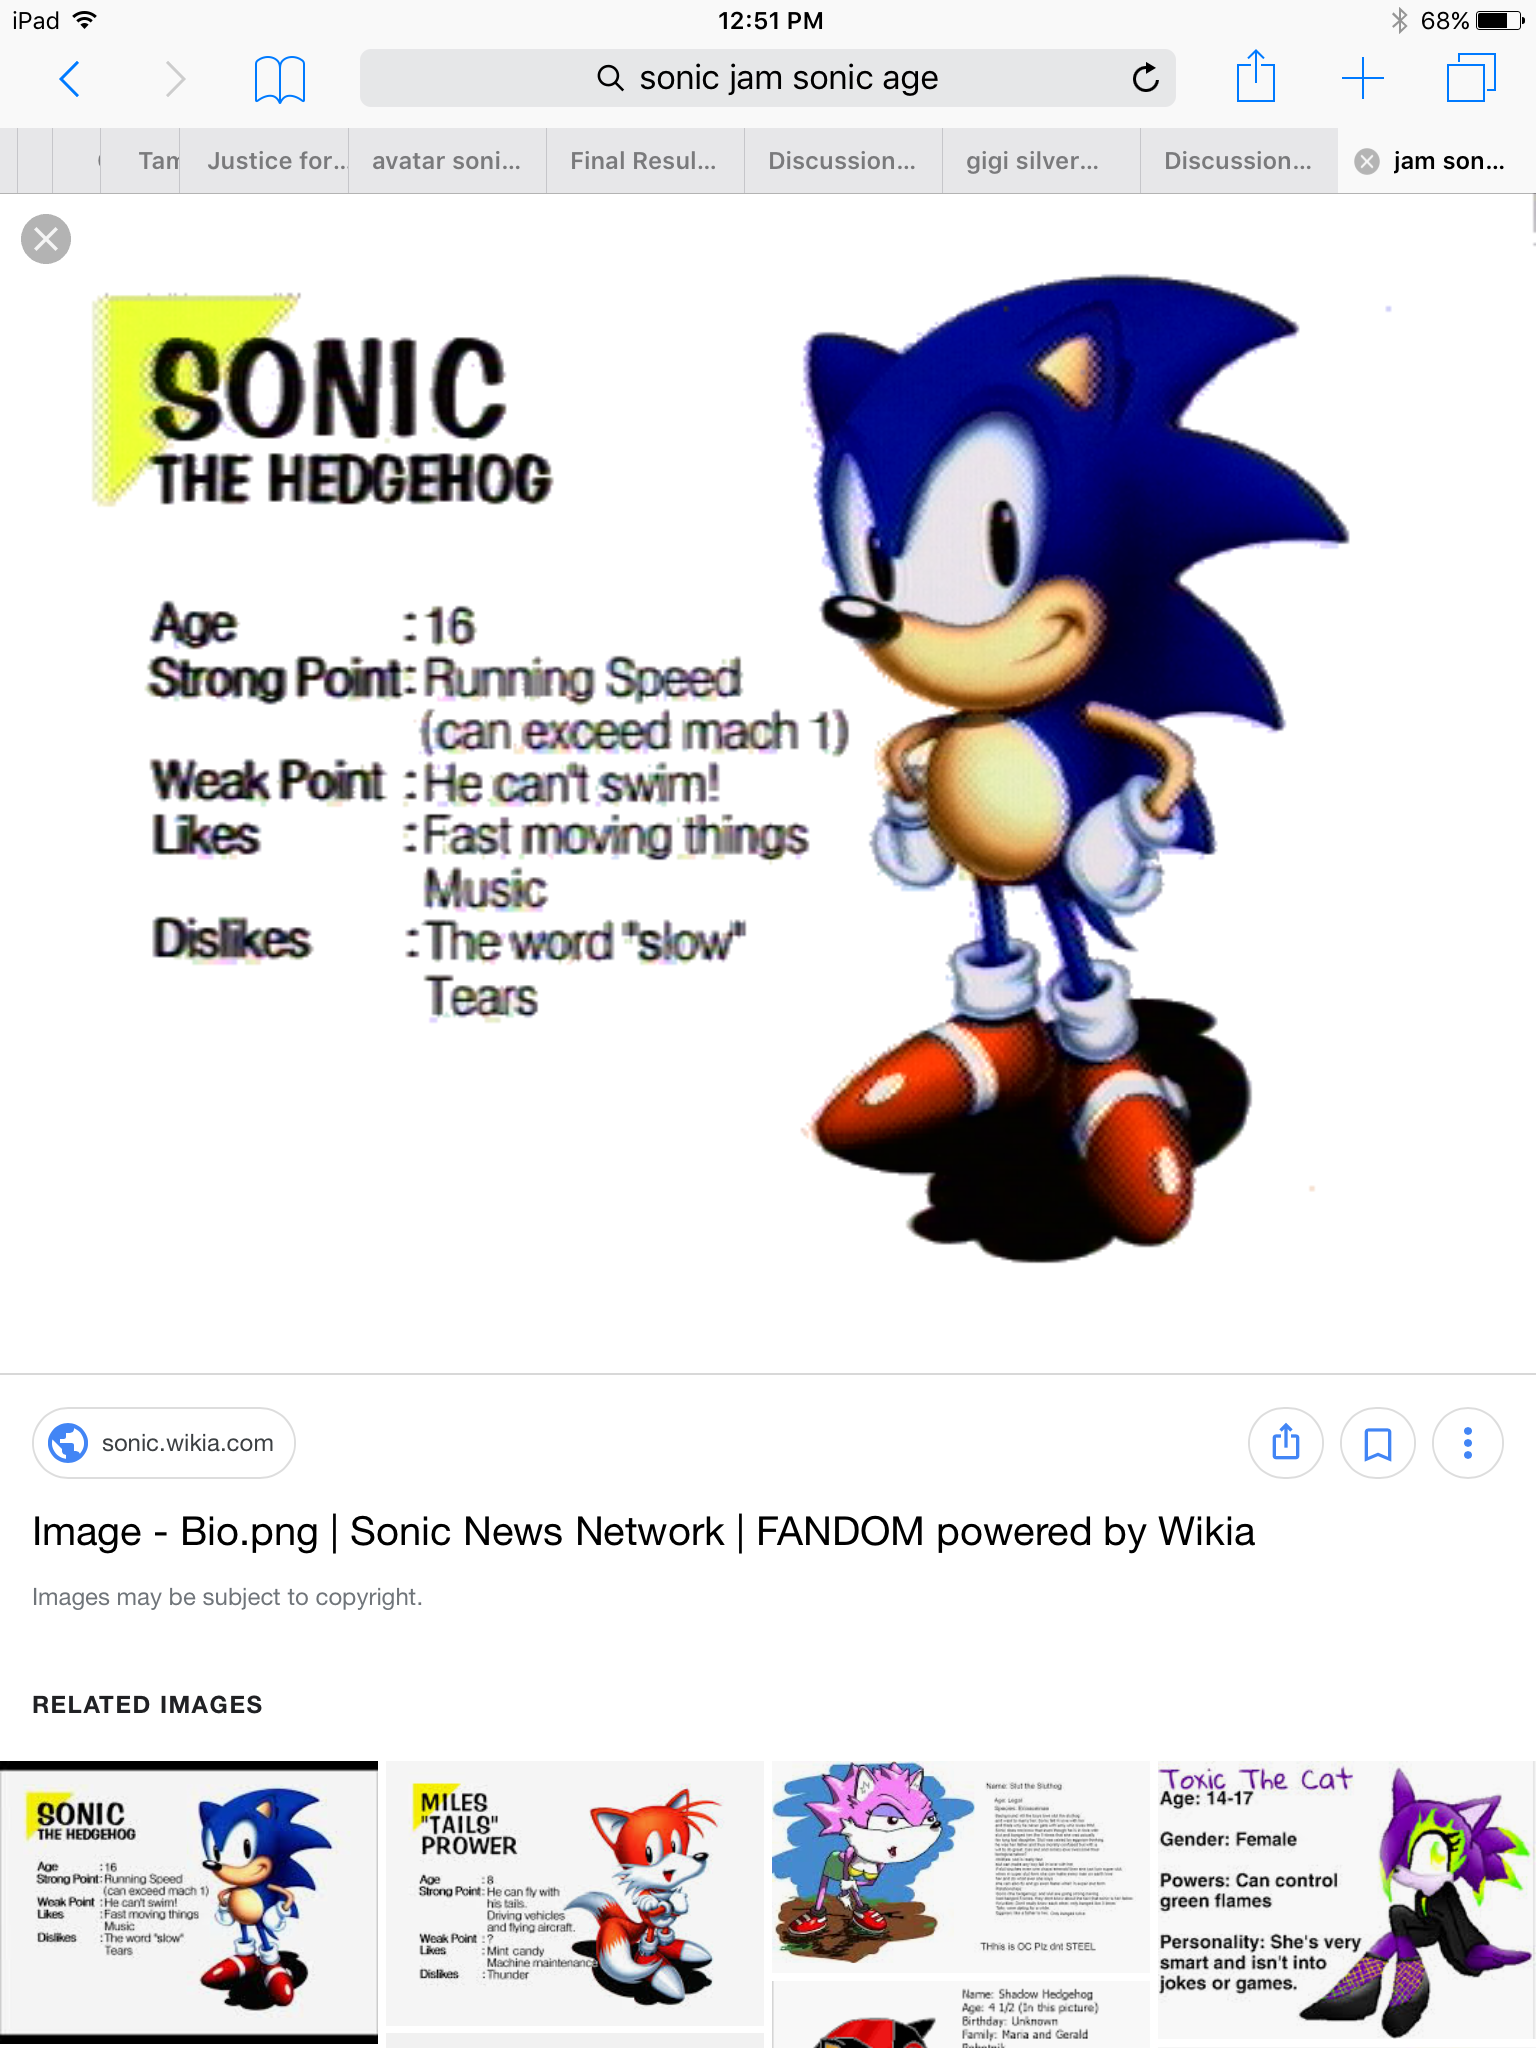 How old is Sonic?